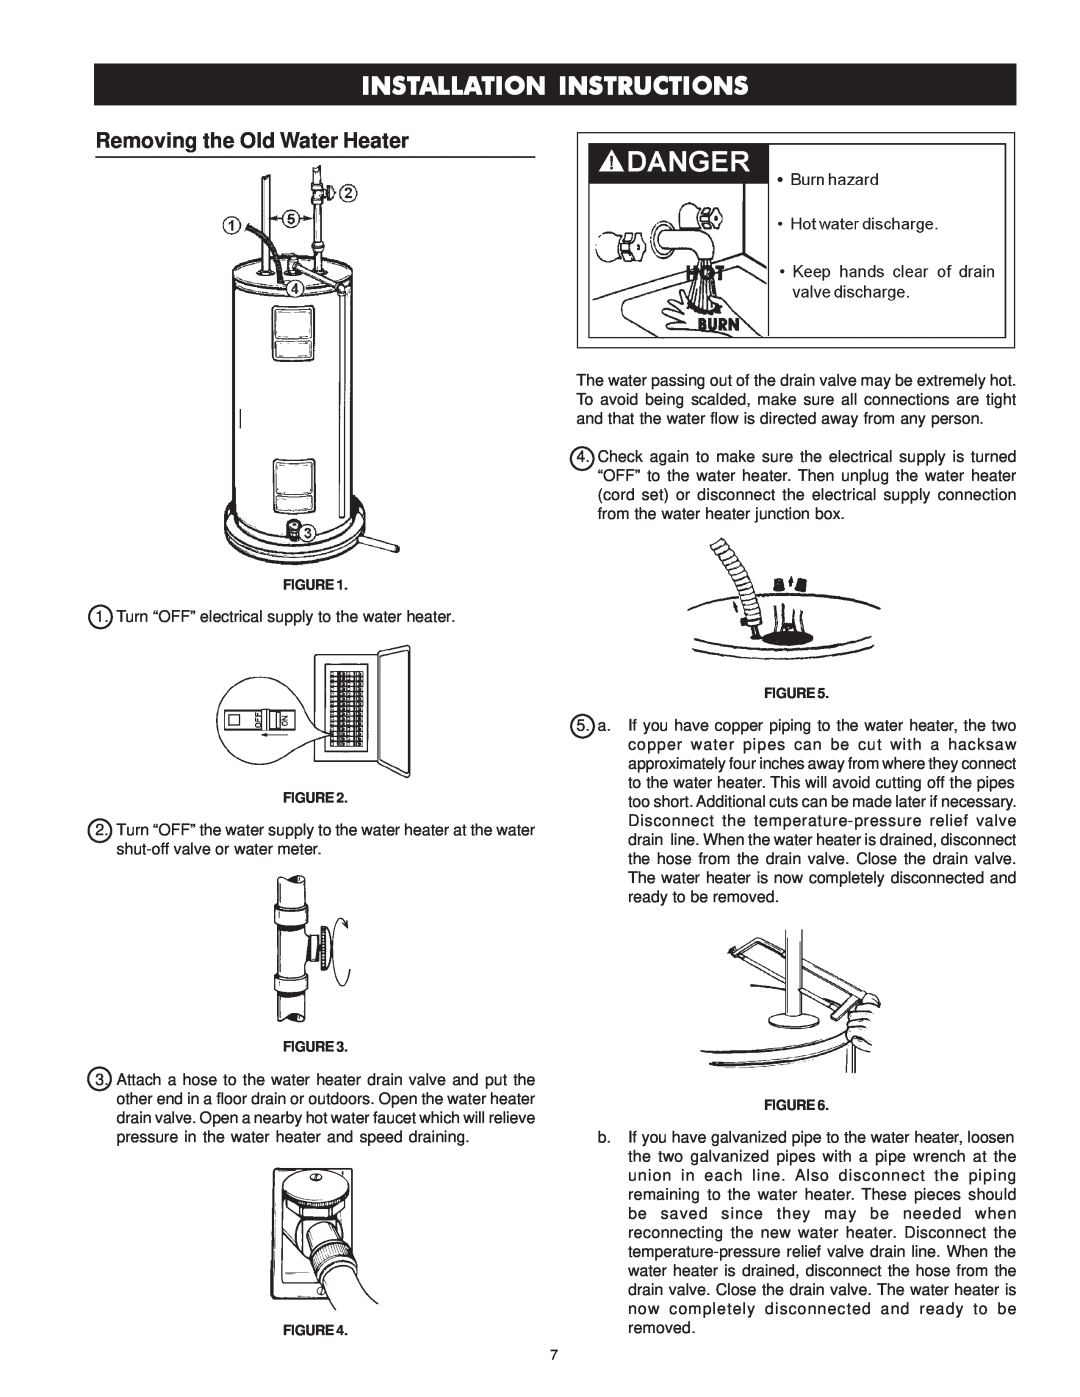 Maytag HRE11250S, HRE11240S, HRE41282T, HRE41250S, HRE41250T manual Installation Instructions, Removing the Old Water Heater 